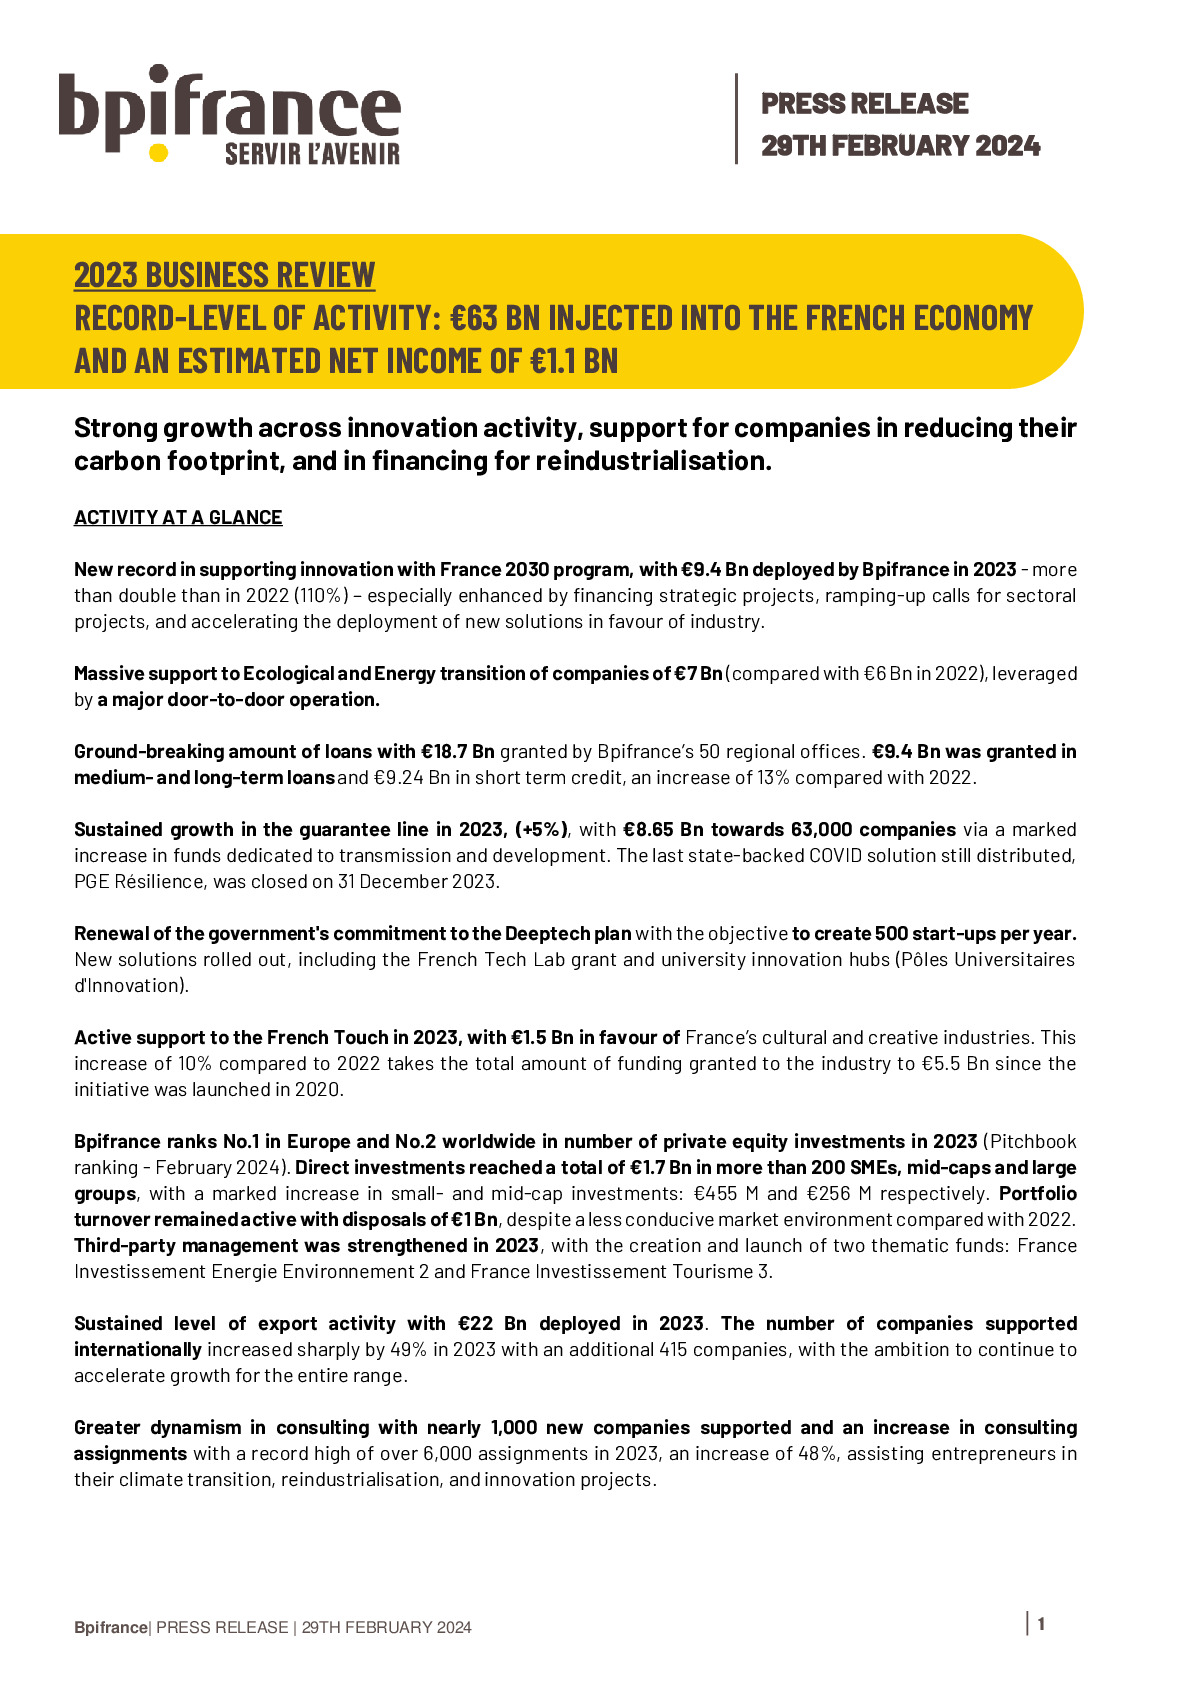 2024 02 29 – PRESS RELEASE – BPIFRANCE 2023 BUSINESS REVIEW-pdf